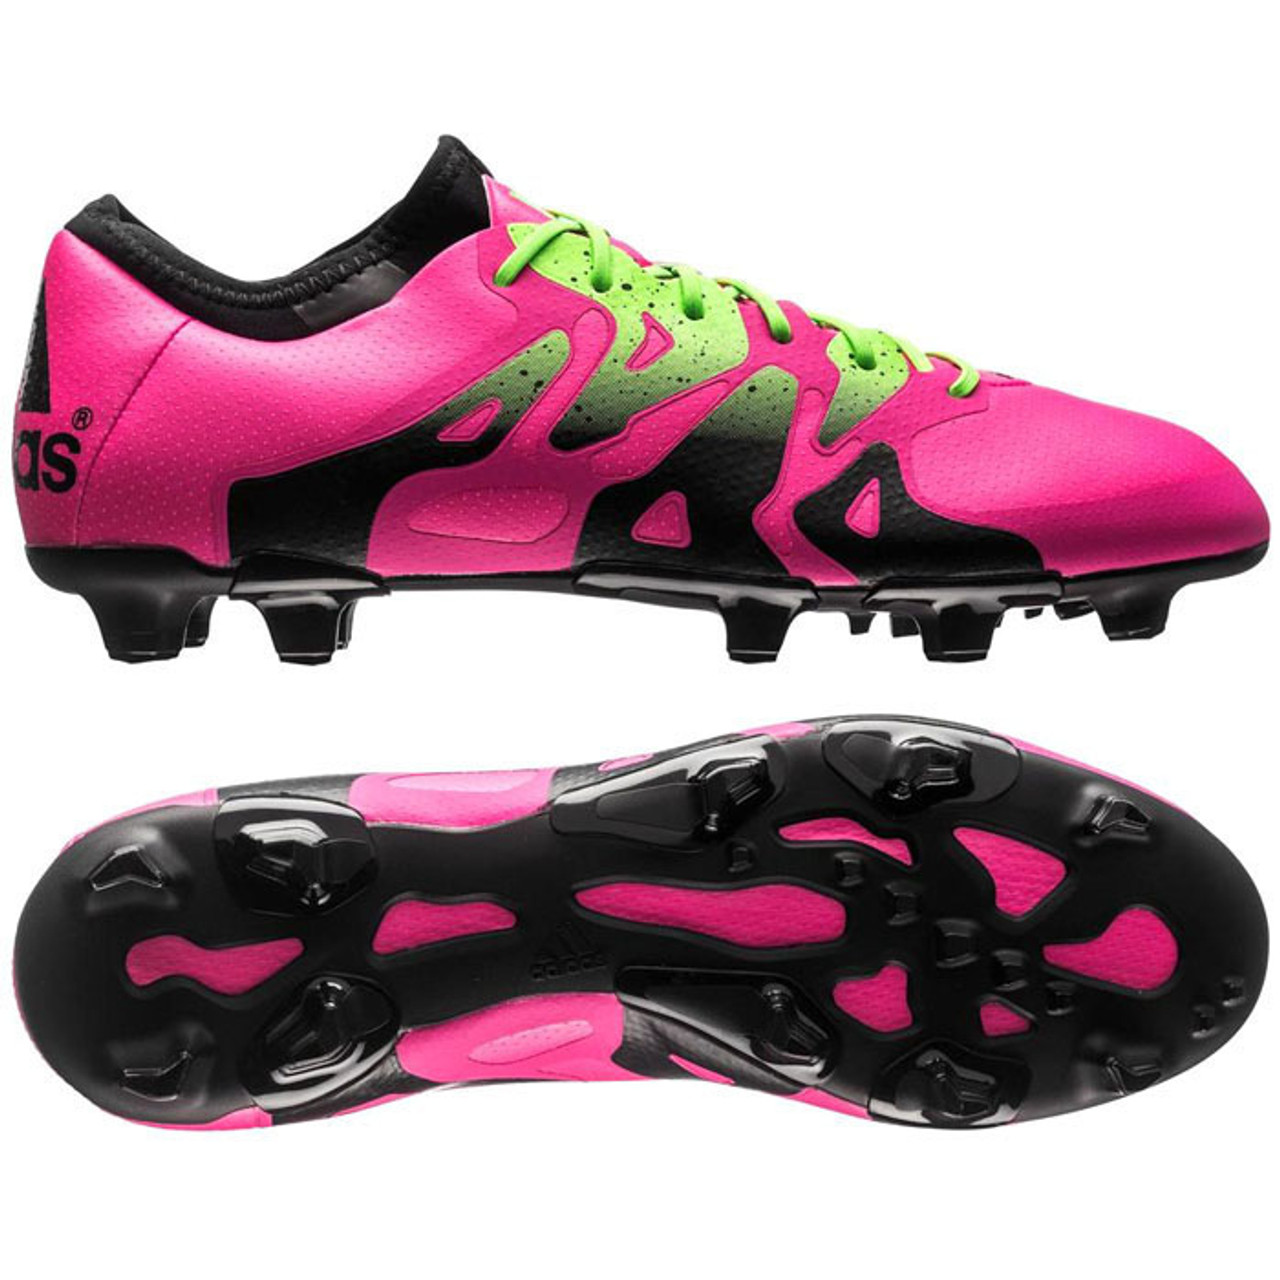 ADIDAS 15.1 FG/AG firm ground soccer cleats shock pink - Soccer Plus